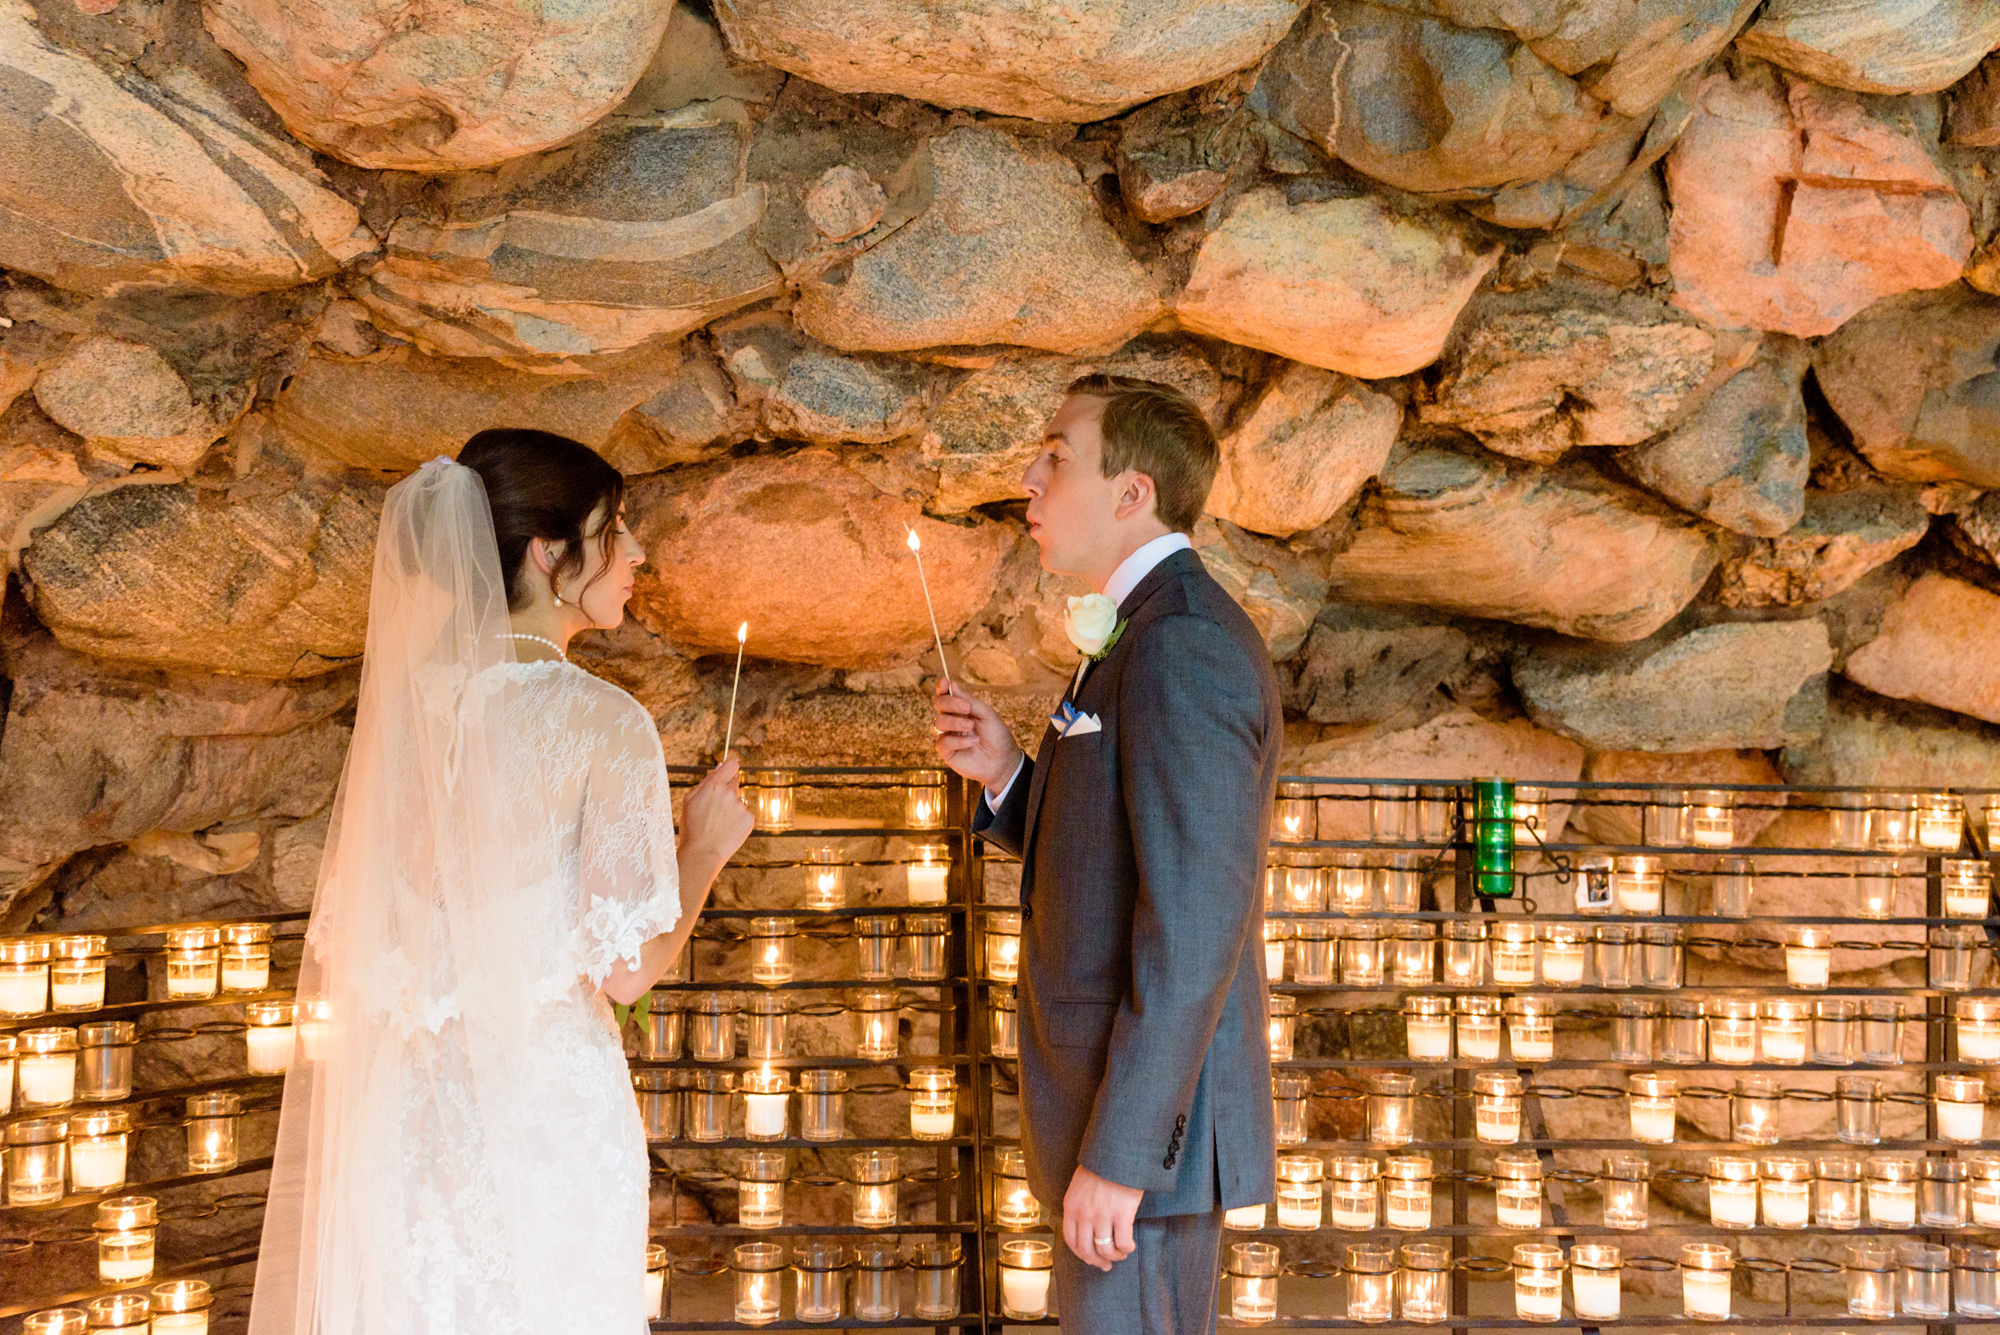 Bride & Groom at the Grotto after their wedding ceremony at the Basilica of the Sacred Heart on the campus of the University of Notre Dame